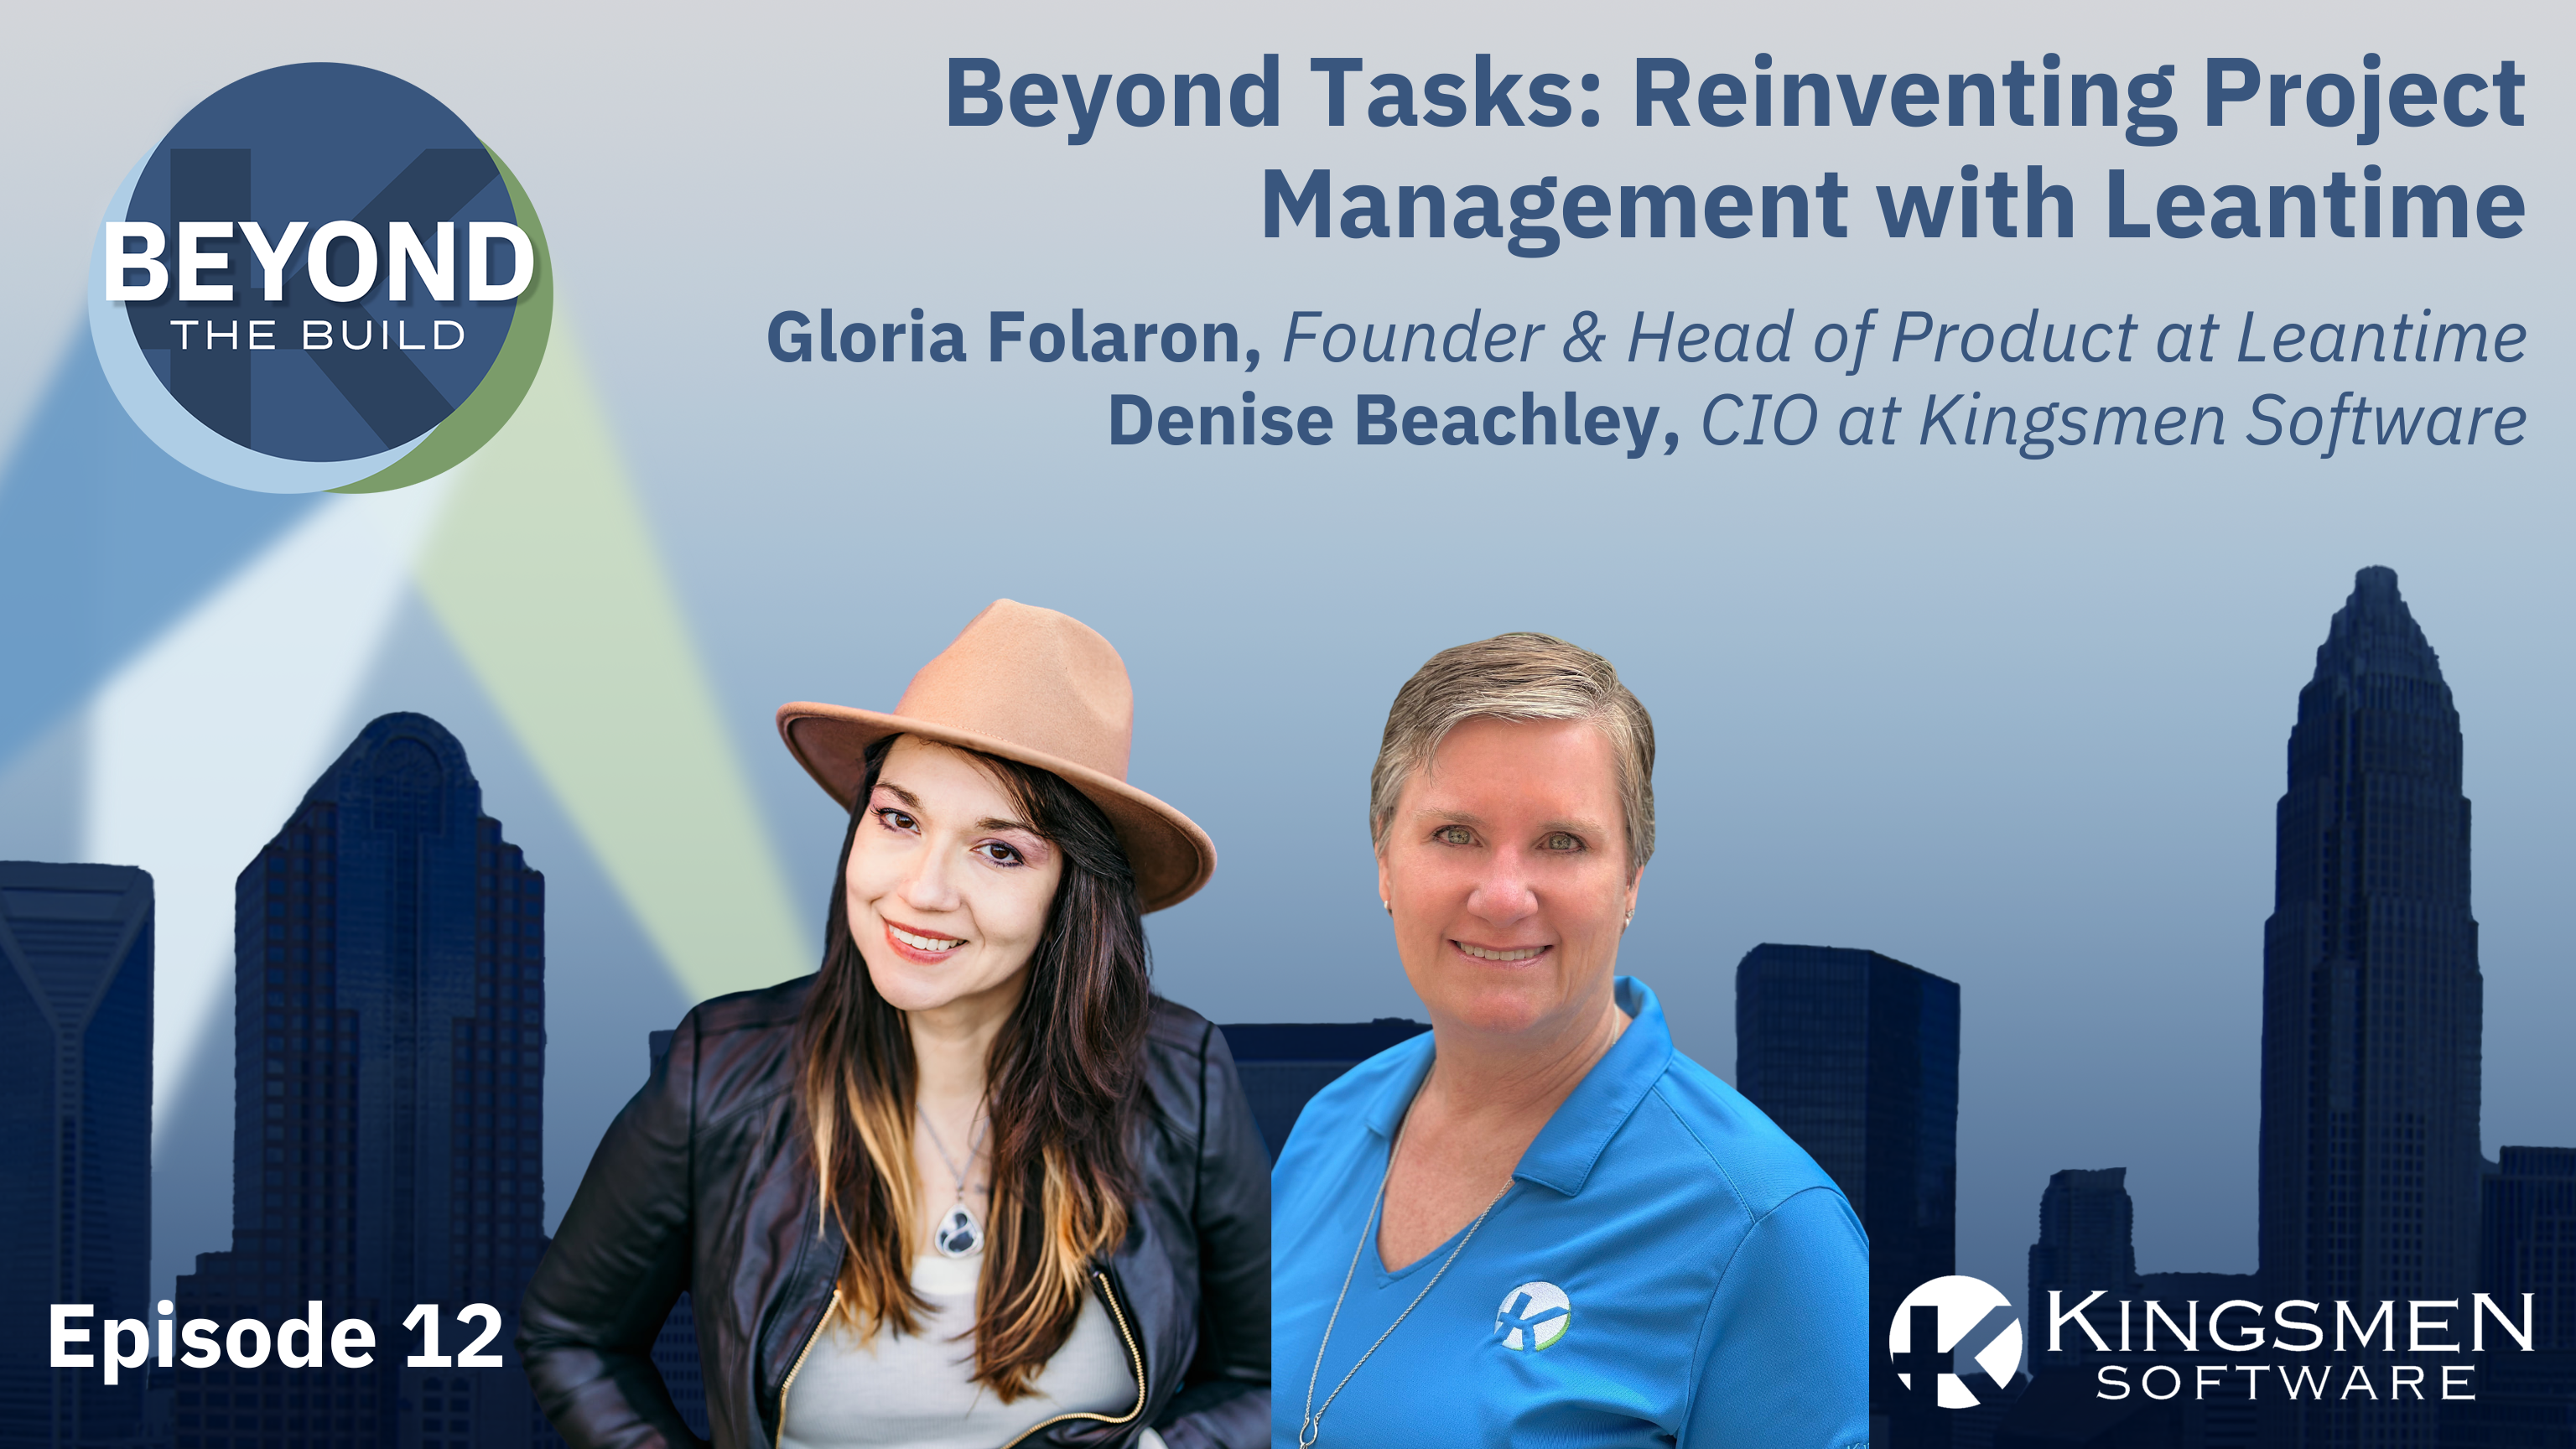 Episode 12: Beyond Tasks - Reinventing Project Management with Leantime